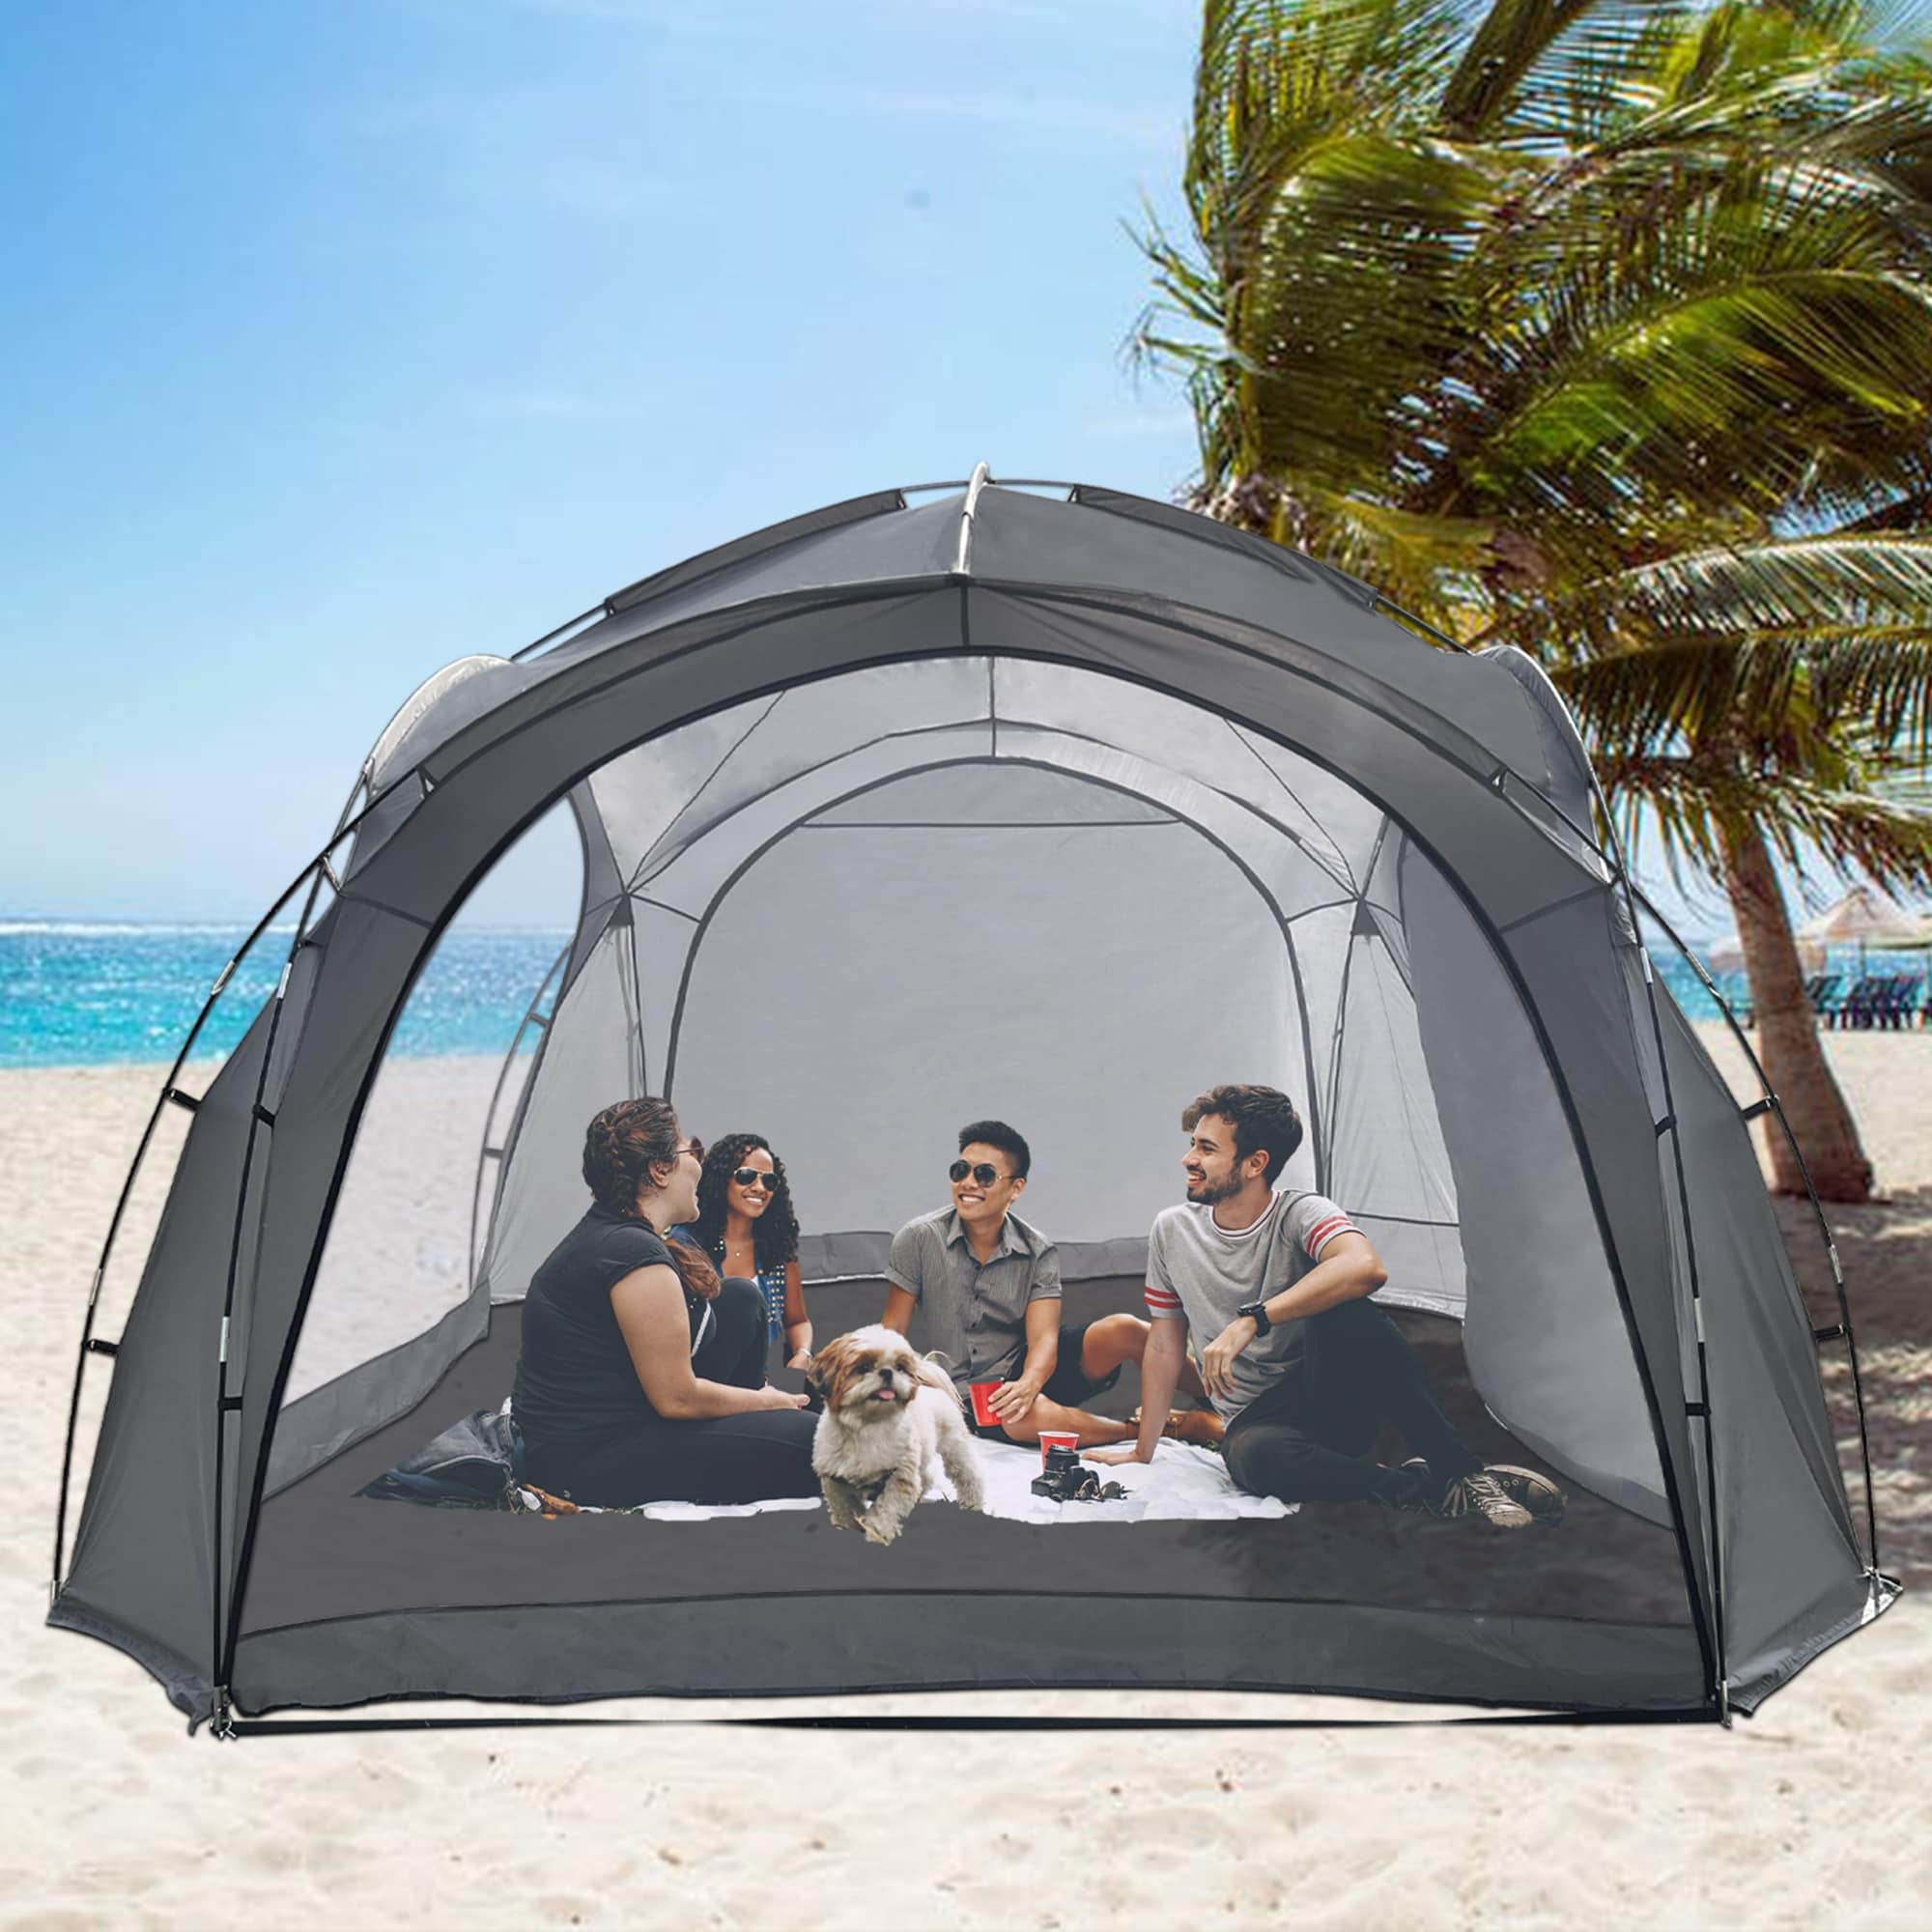  4-6 Person Inflatable Cabin Camping Tent with Canopy, Picnic  Blanket - Waterproof, Easy Setup : Sports & Outdoors